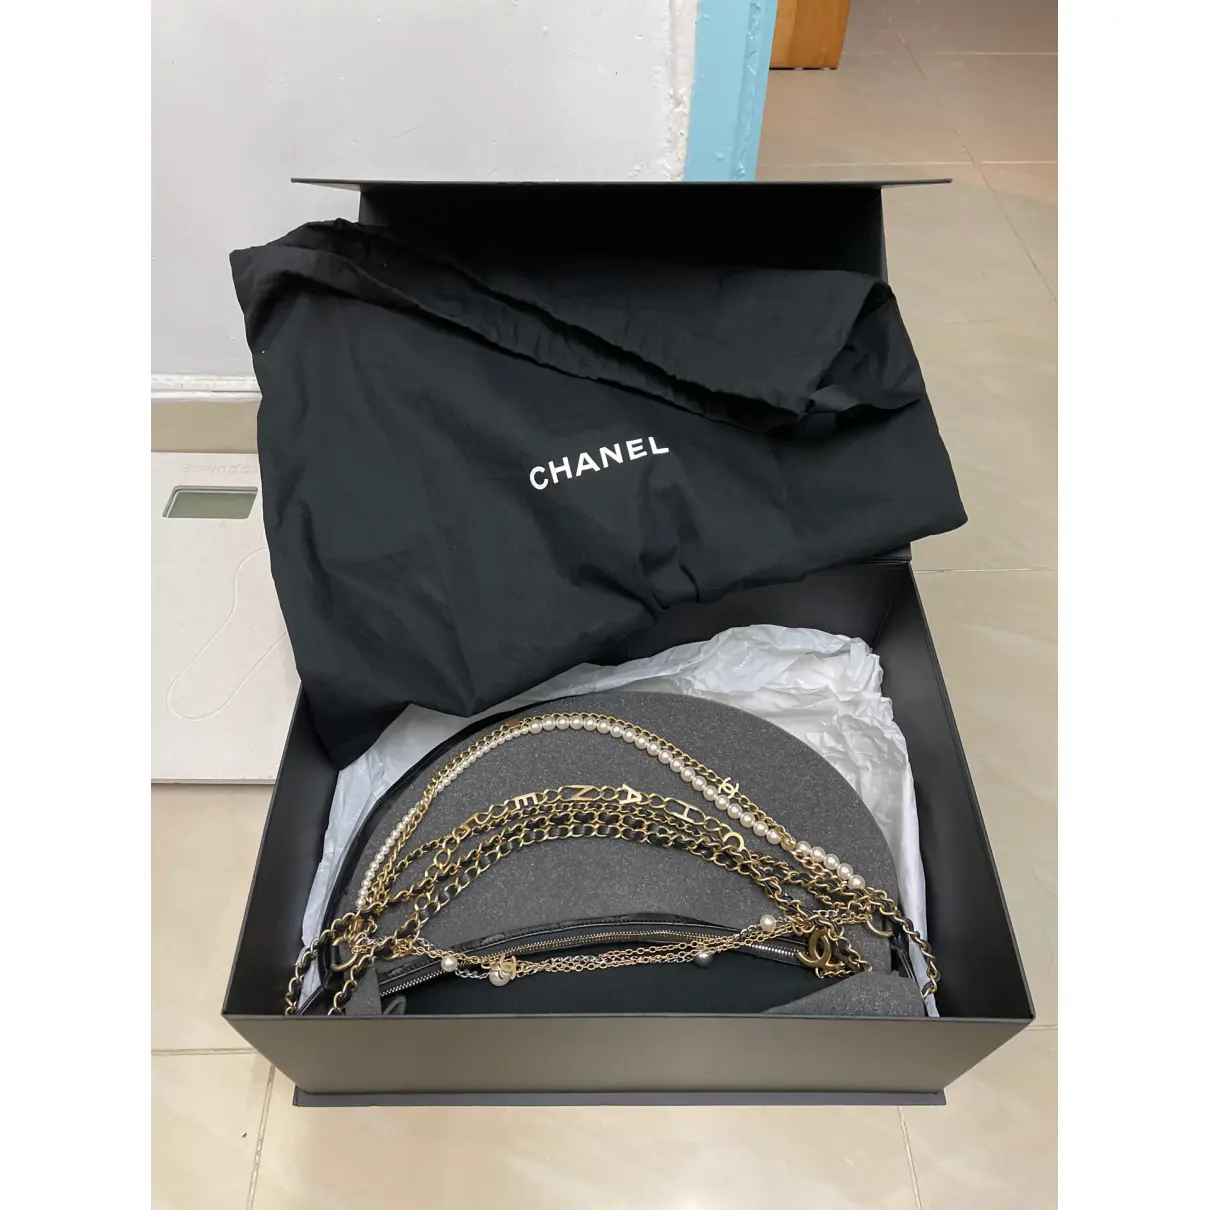 All About Chains leather handbag Chanel